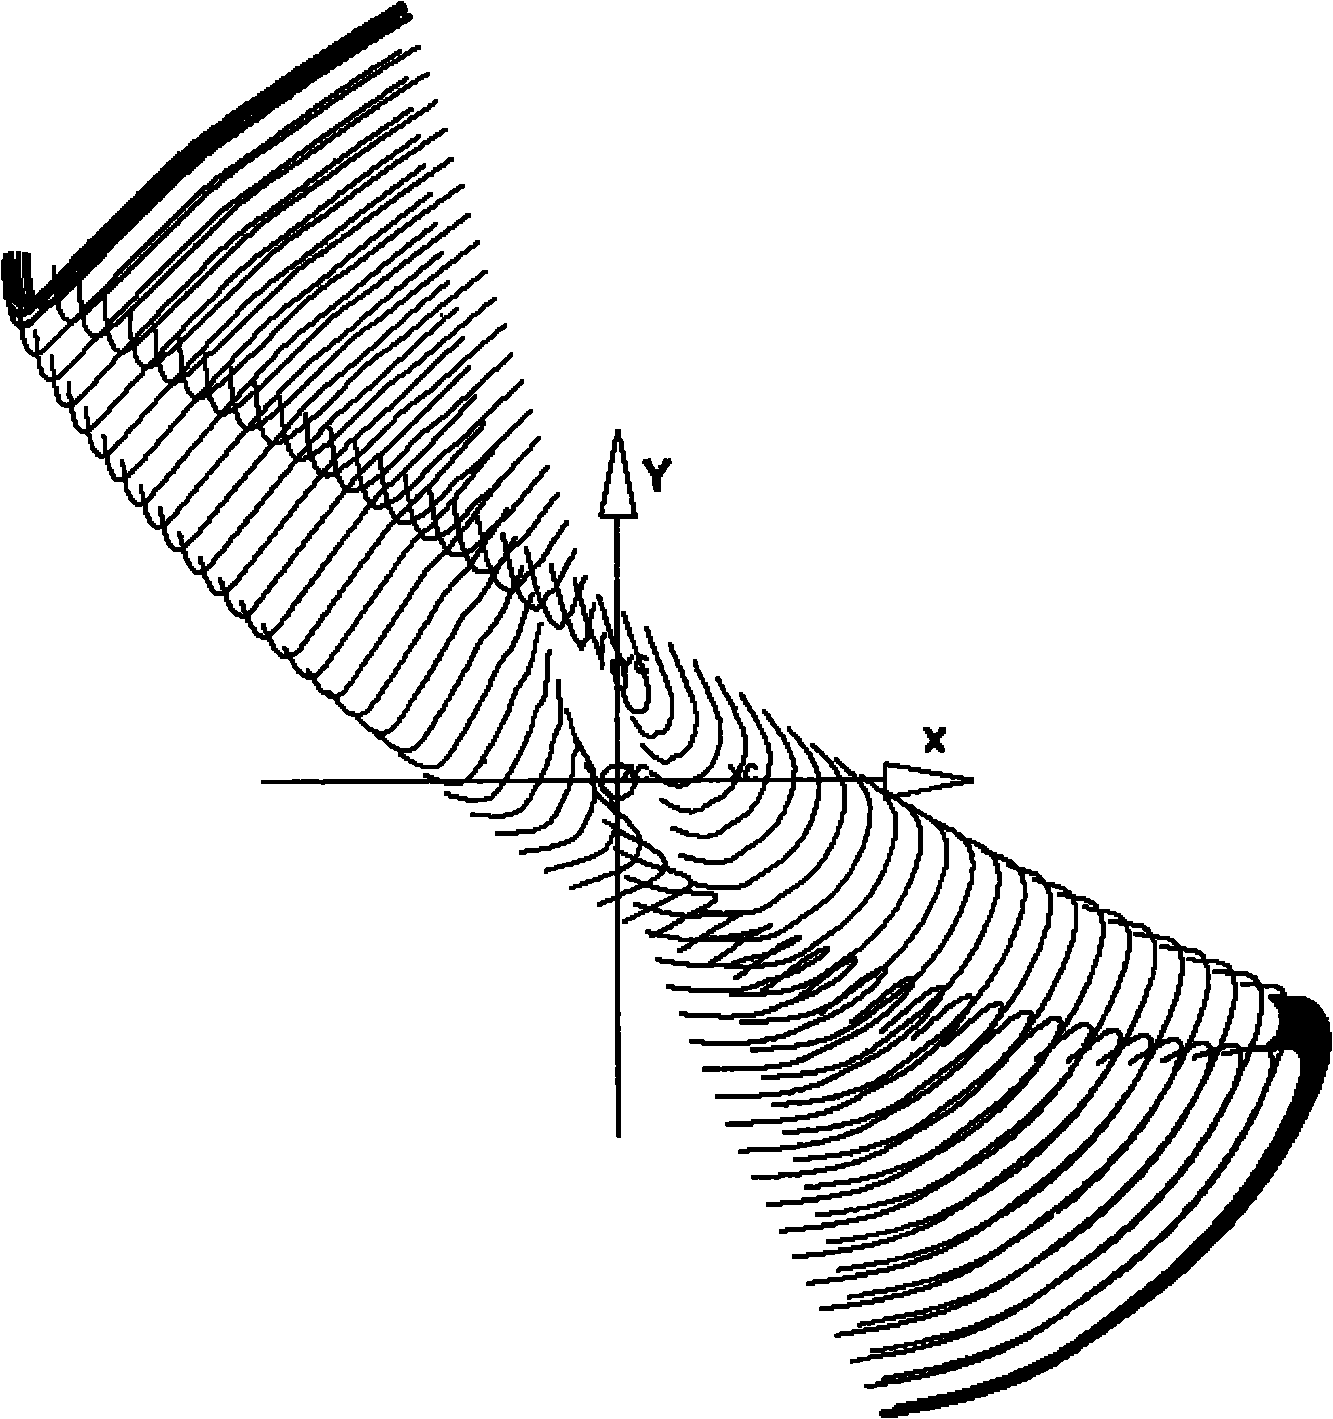 Computing method of revolution section profile of turbomachinery blade